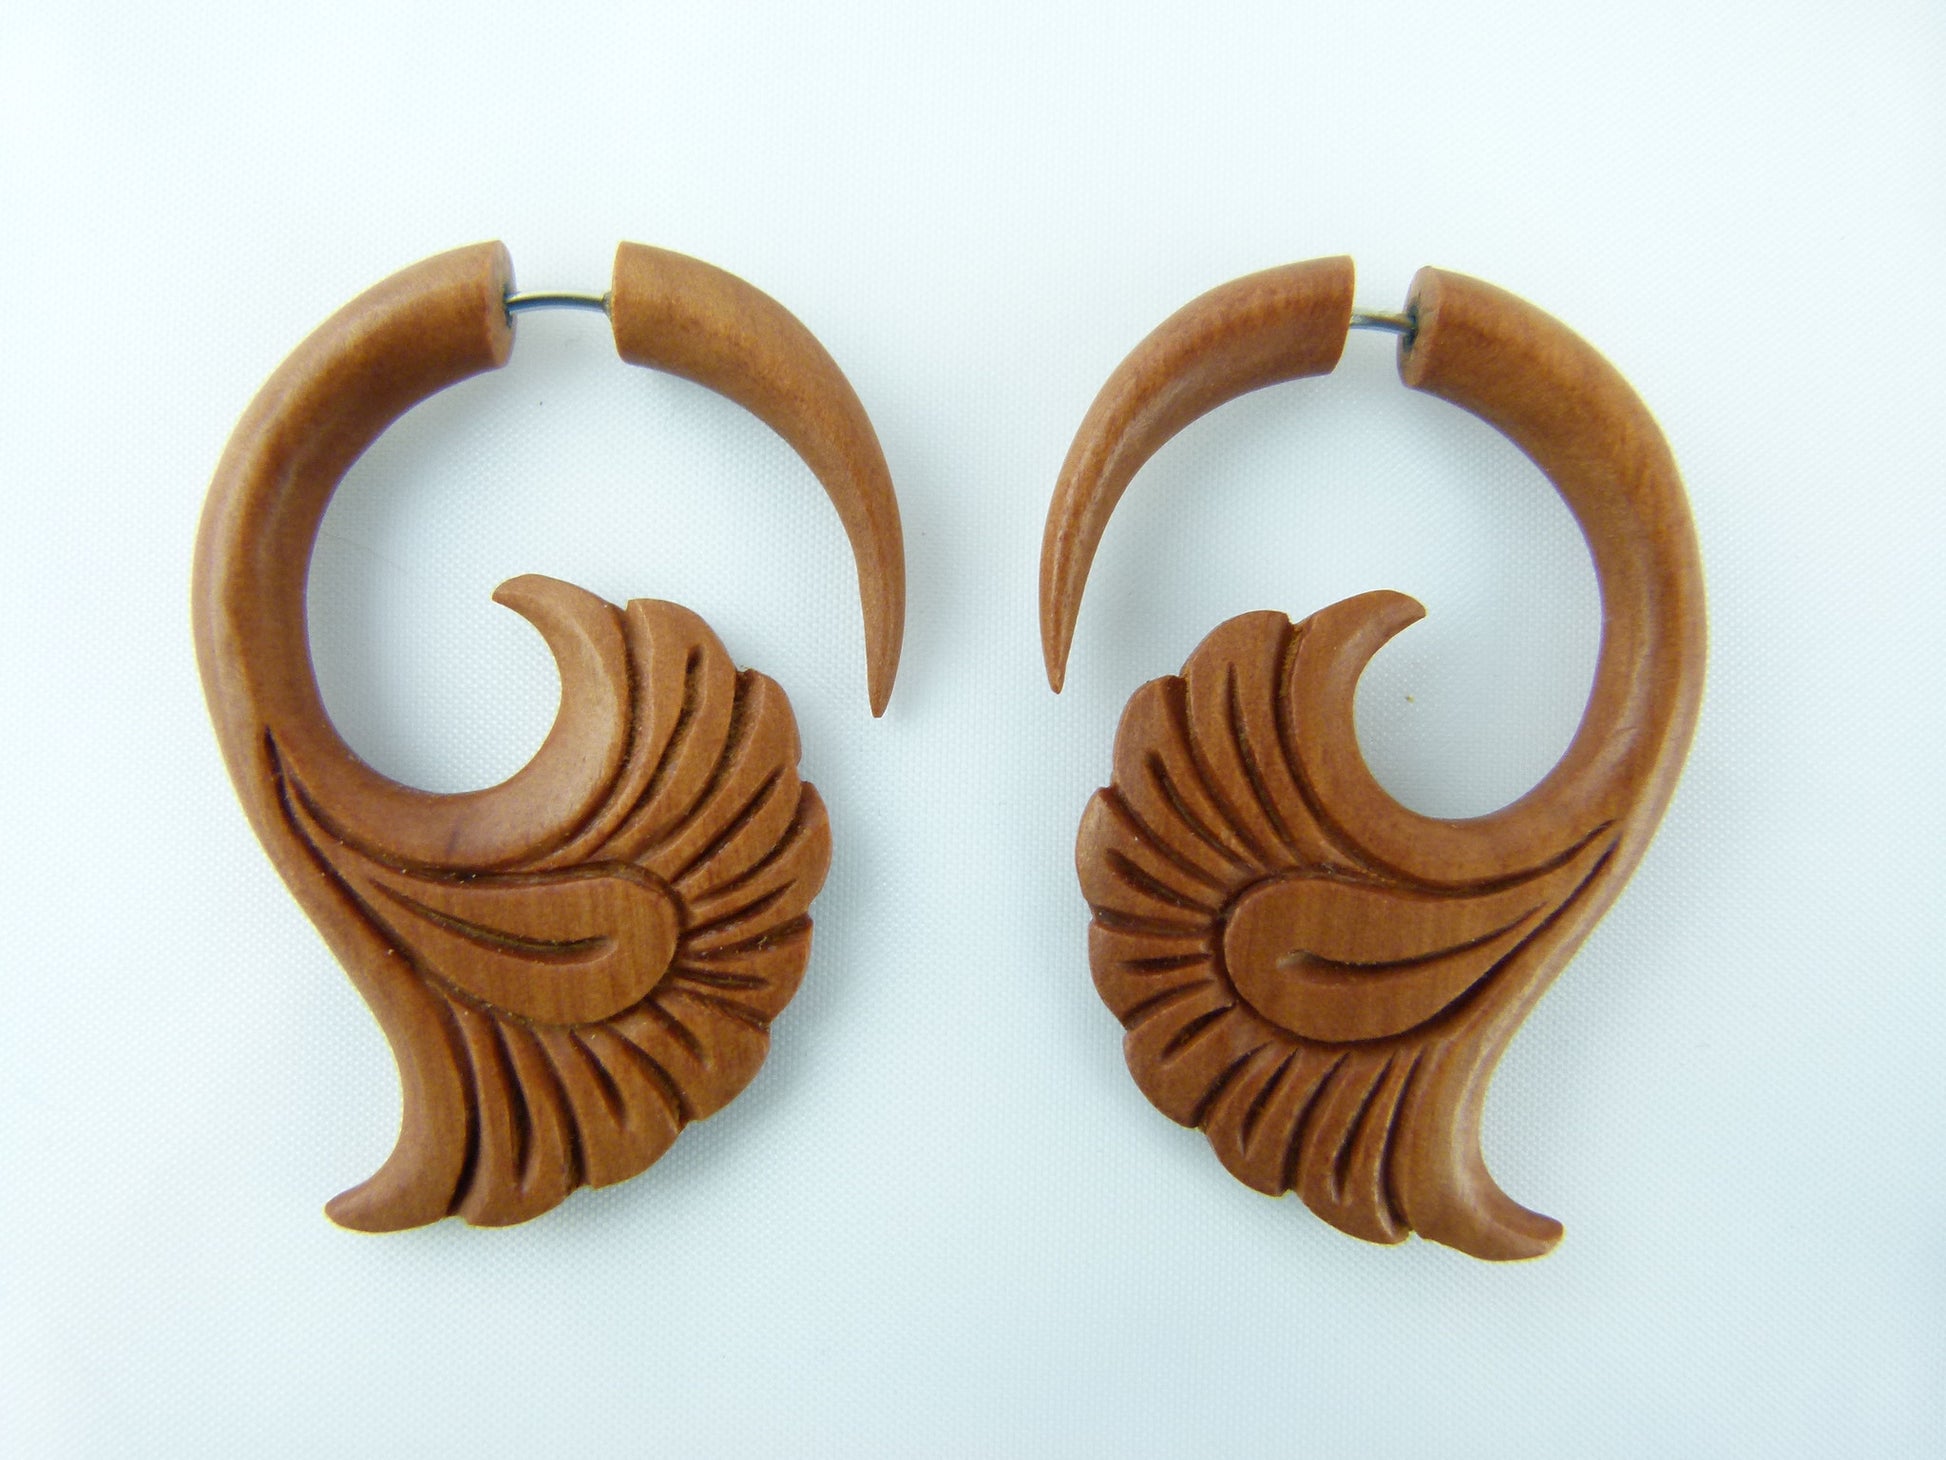 Wood Fanned Feather Hanger Plugs - Fake Pair